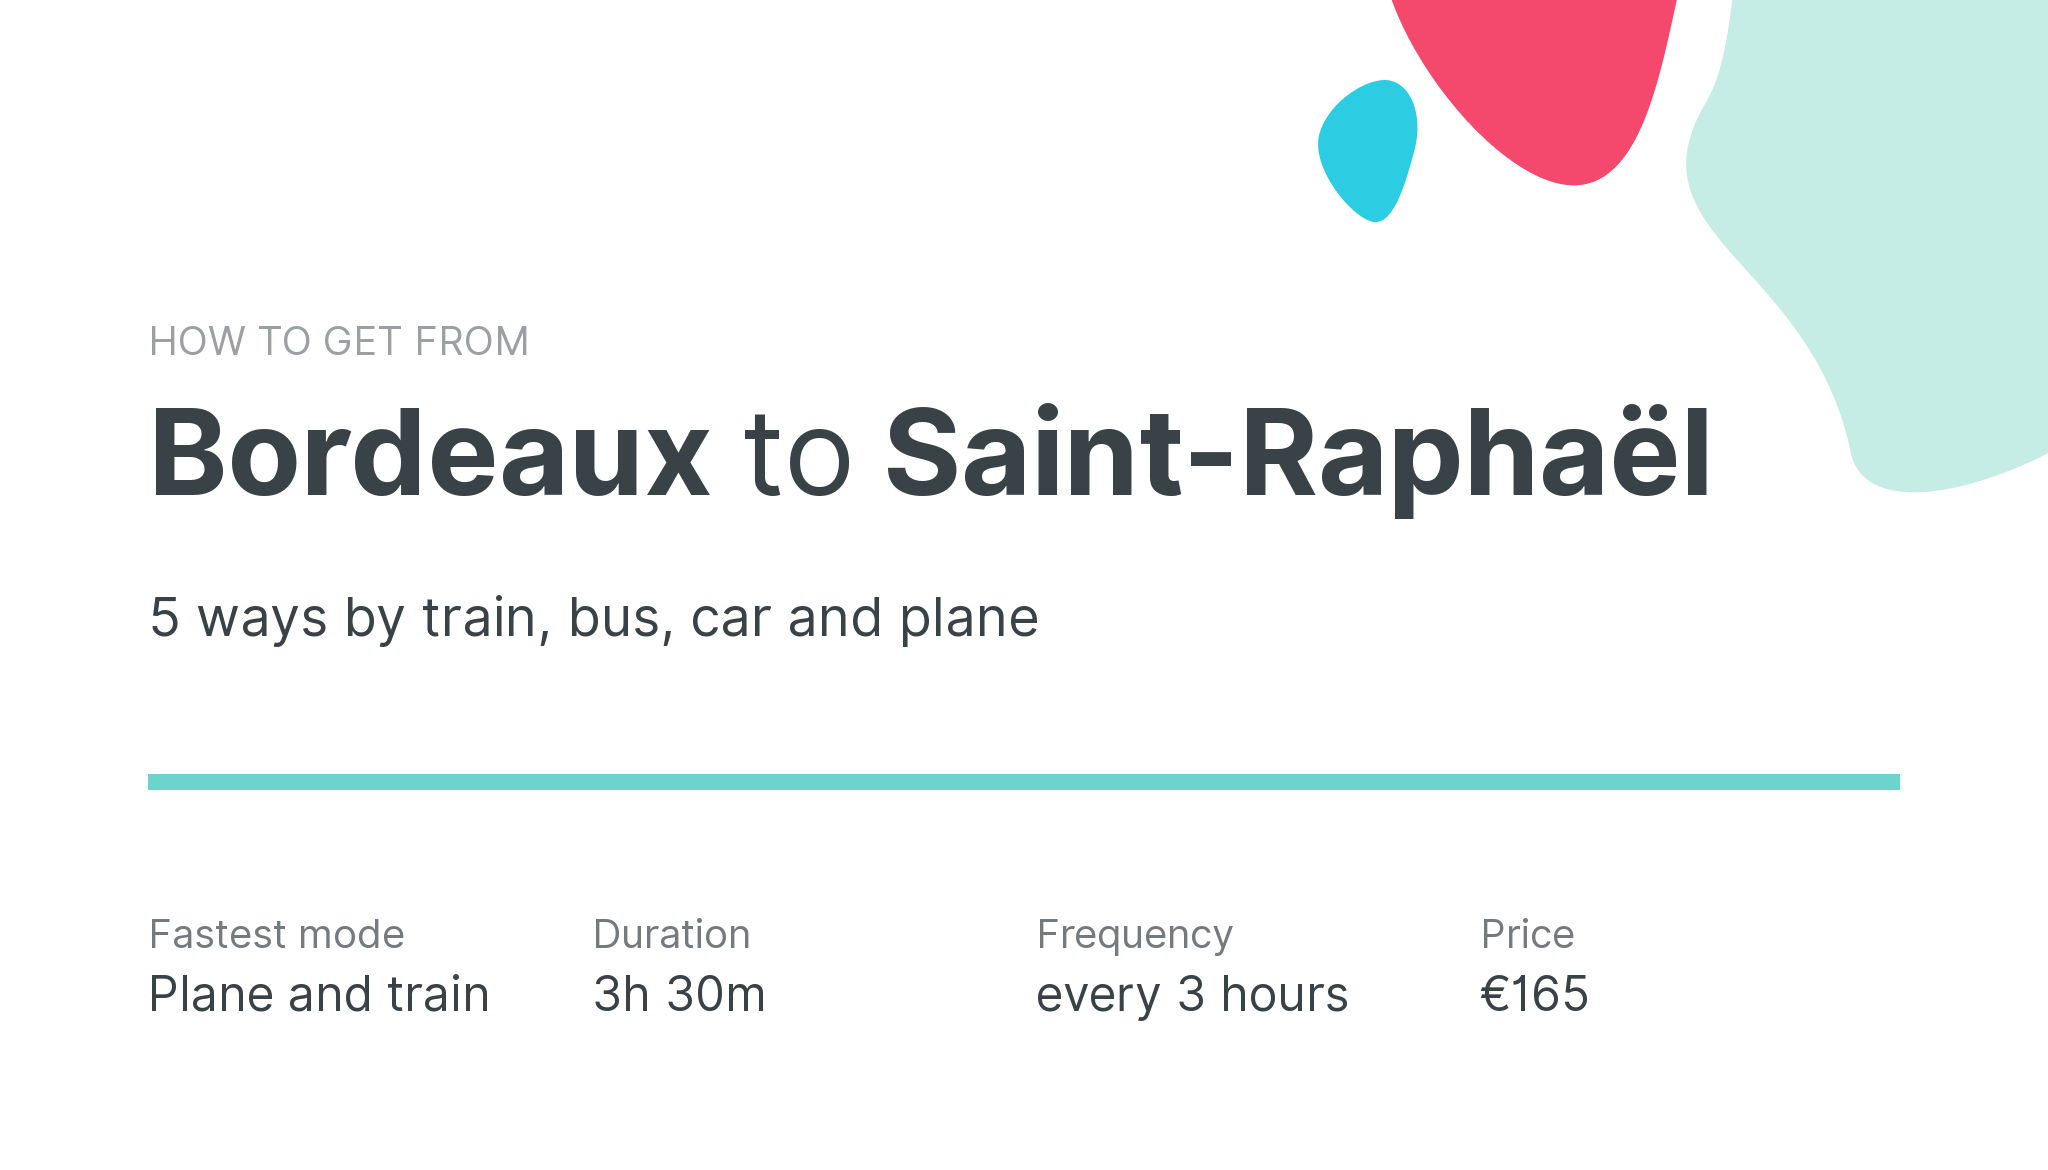 How do I get from Bordeaux to Saint-Raphaël